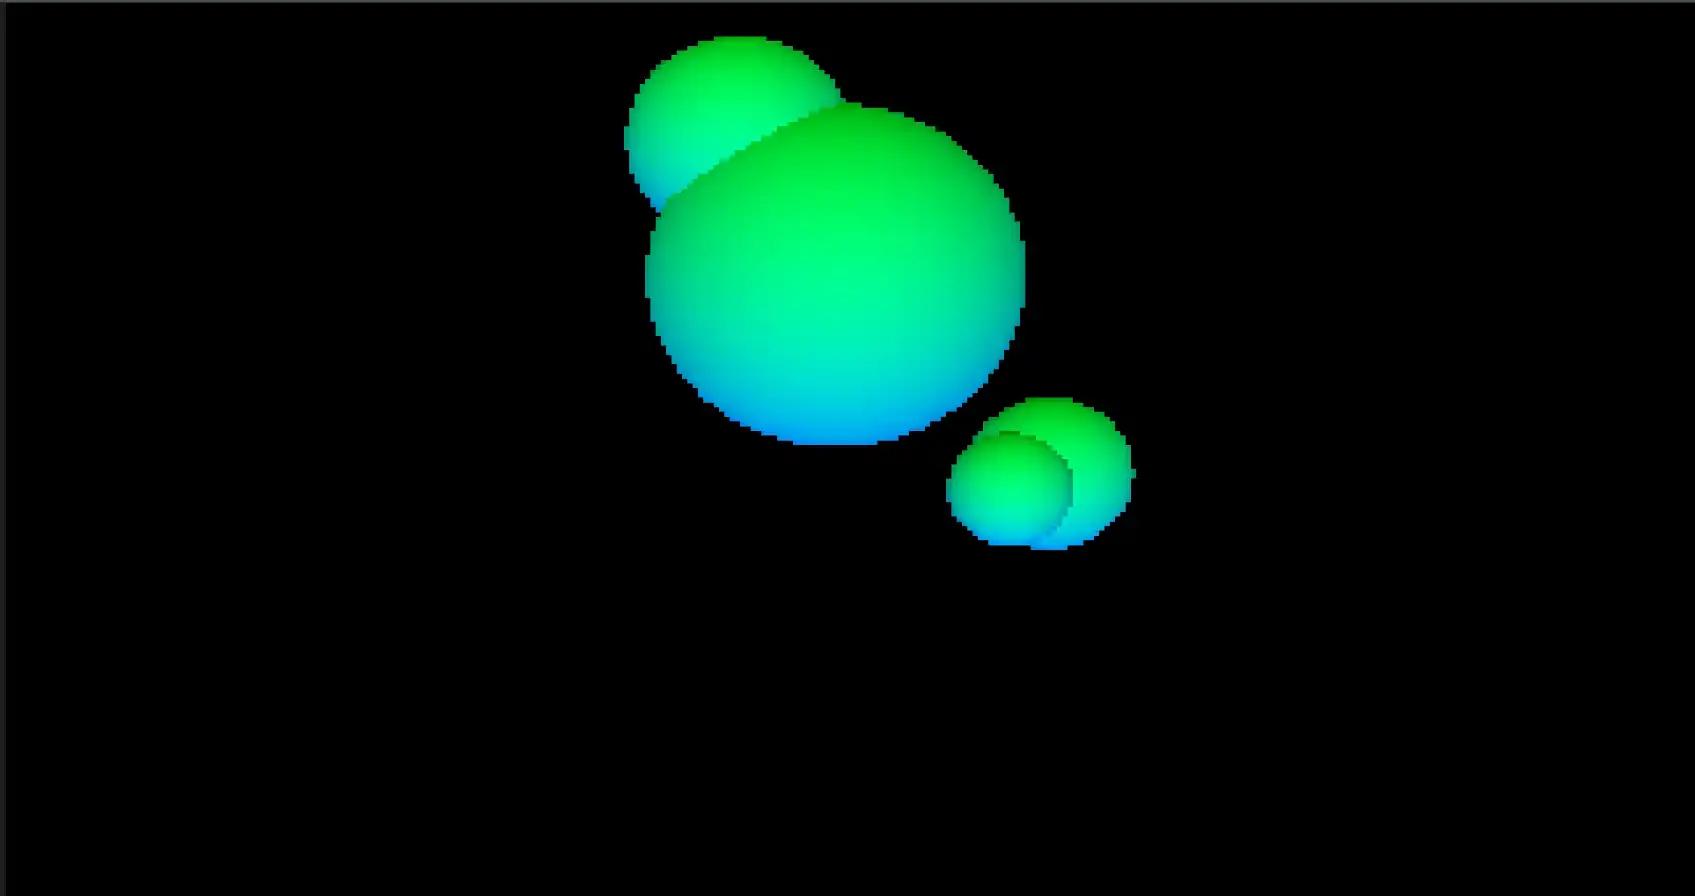 Blue and green spherical shapes